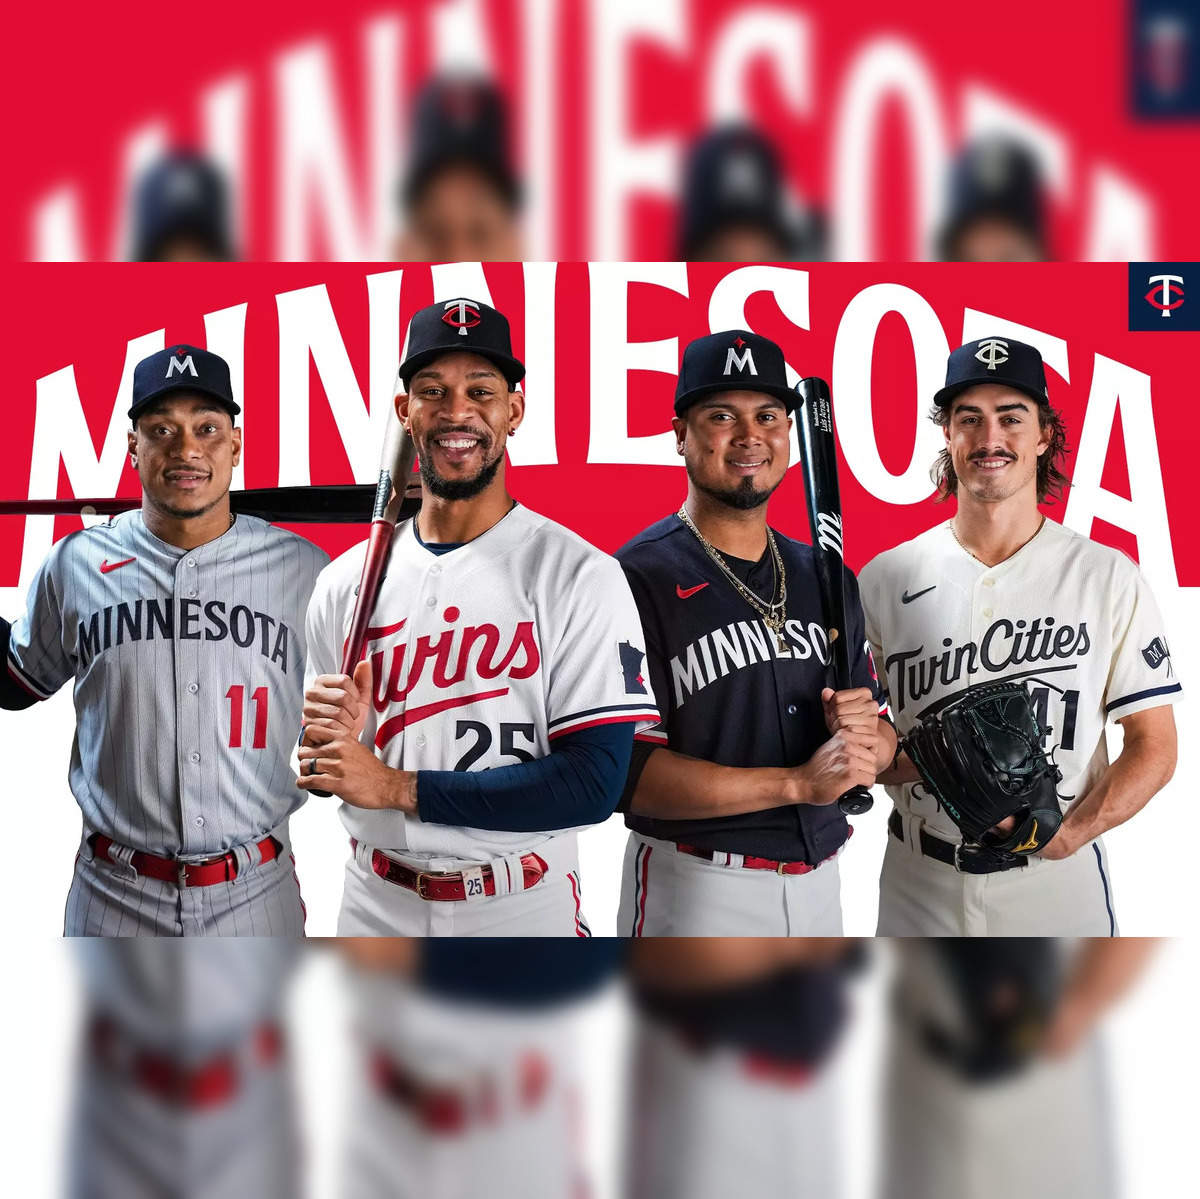 Minnesota Twins' new logo very similar to the old one